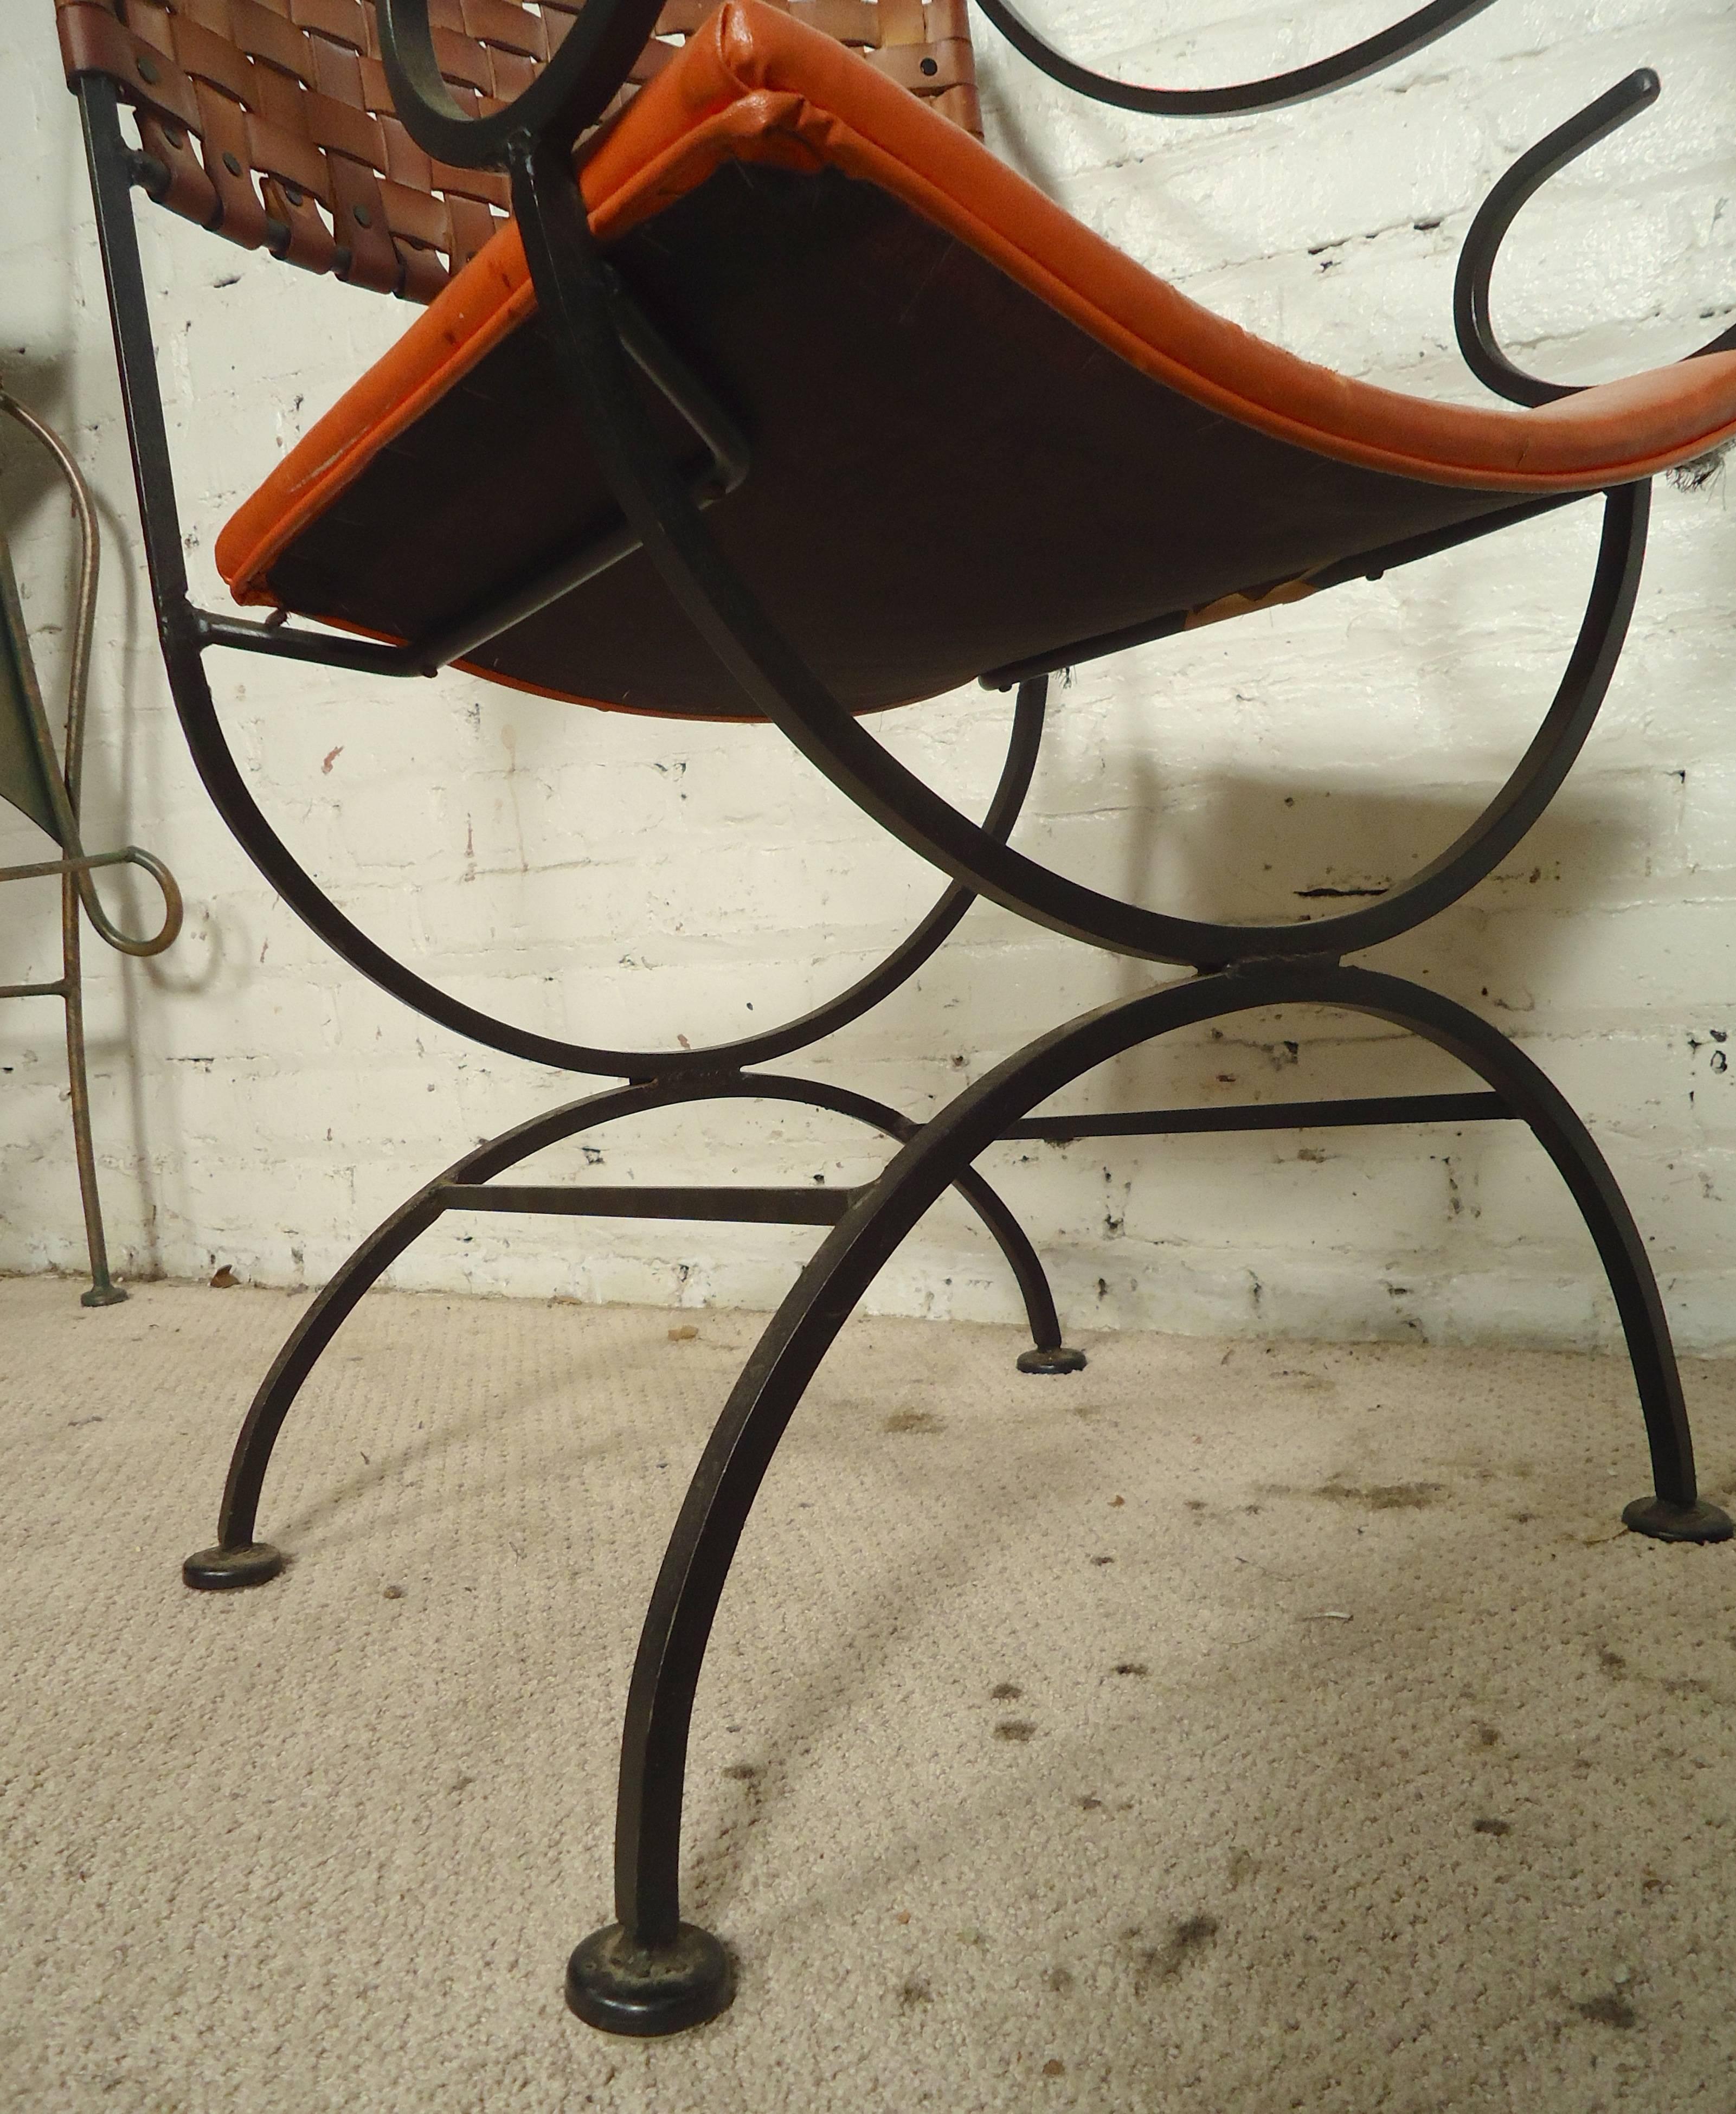 Pair of strong iron chairs with attractive scrolled arms and woven leather backs. Well made, sturdy arm chairs that are comfortable for both indoor and outdoor seating.

(Please confirm item location, NY or NJ, with dealer).
 